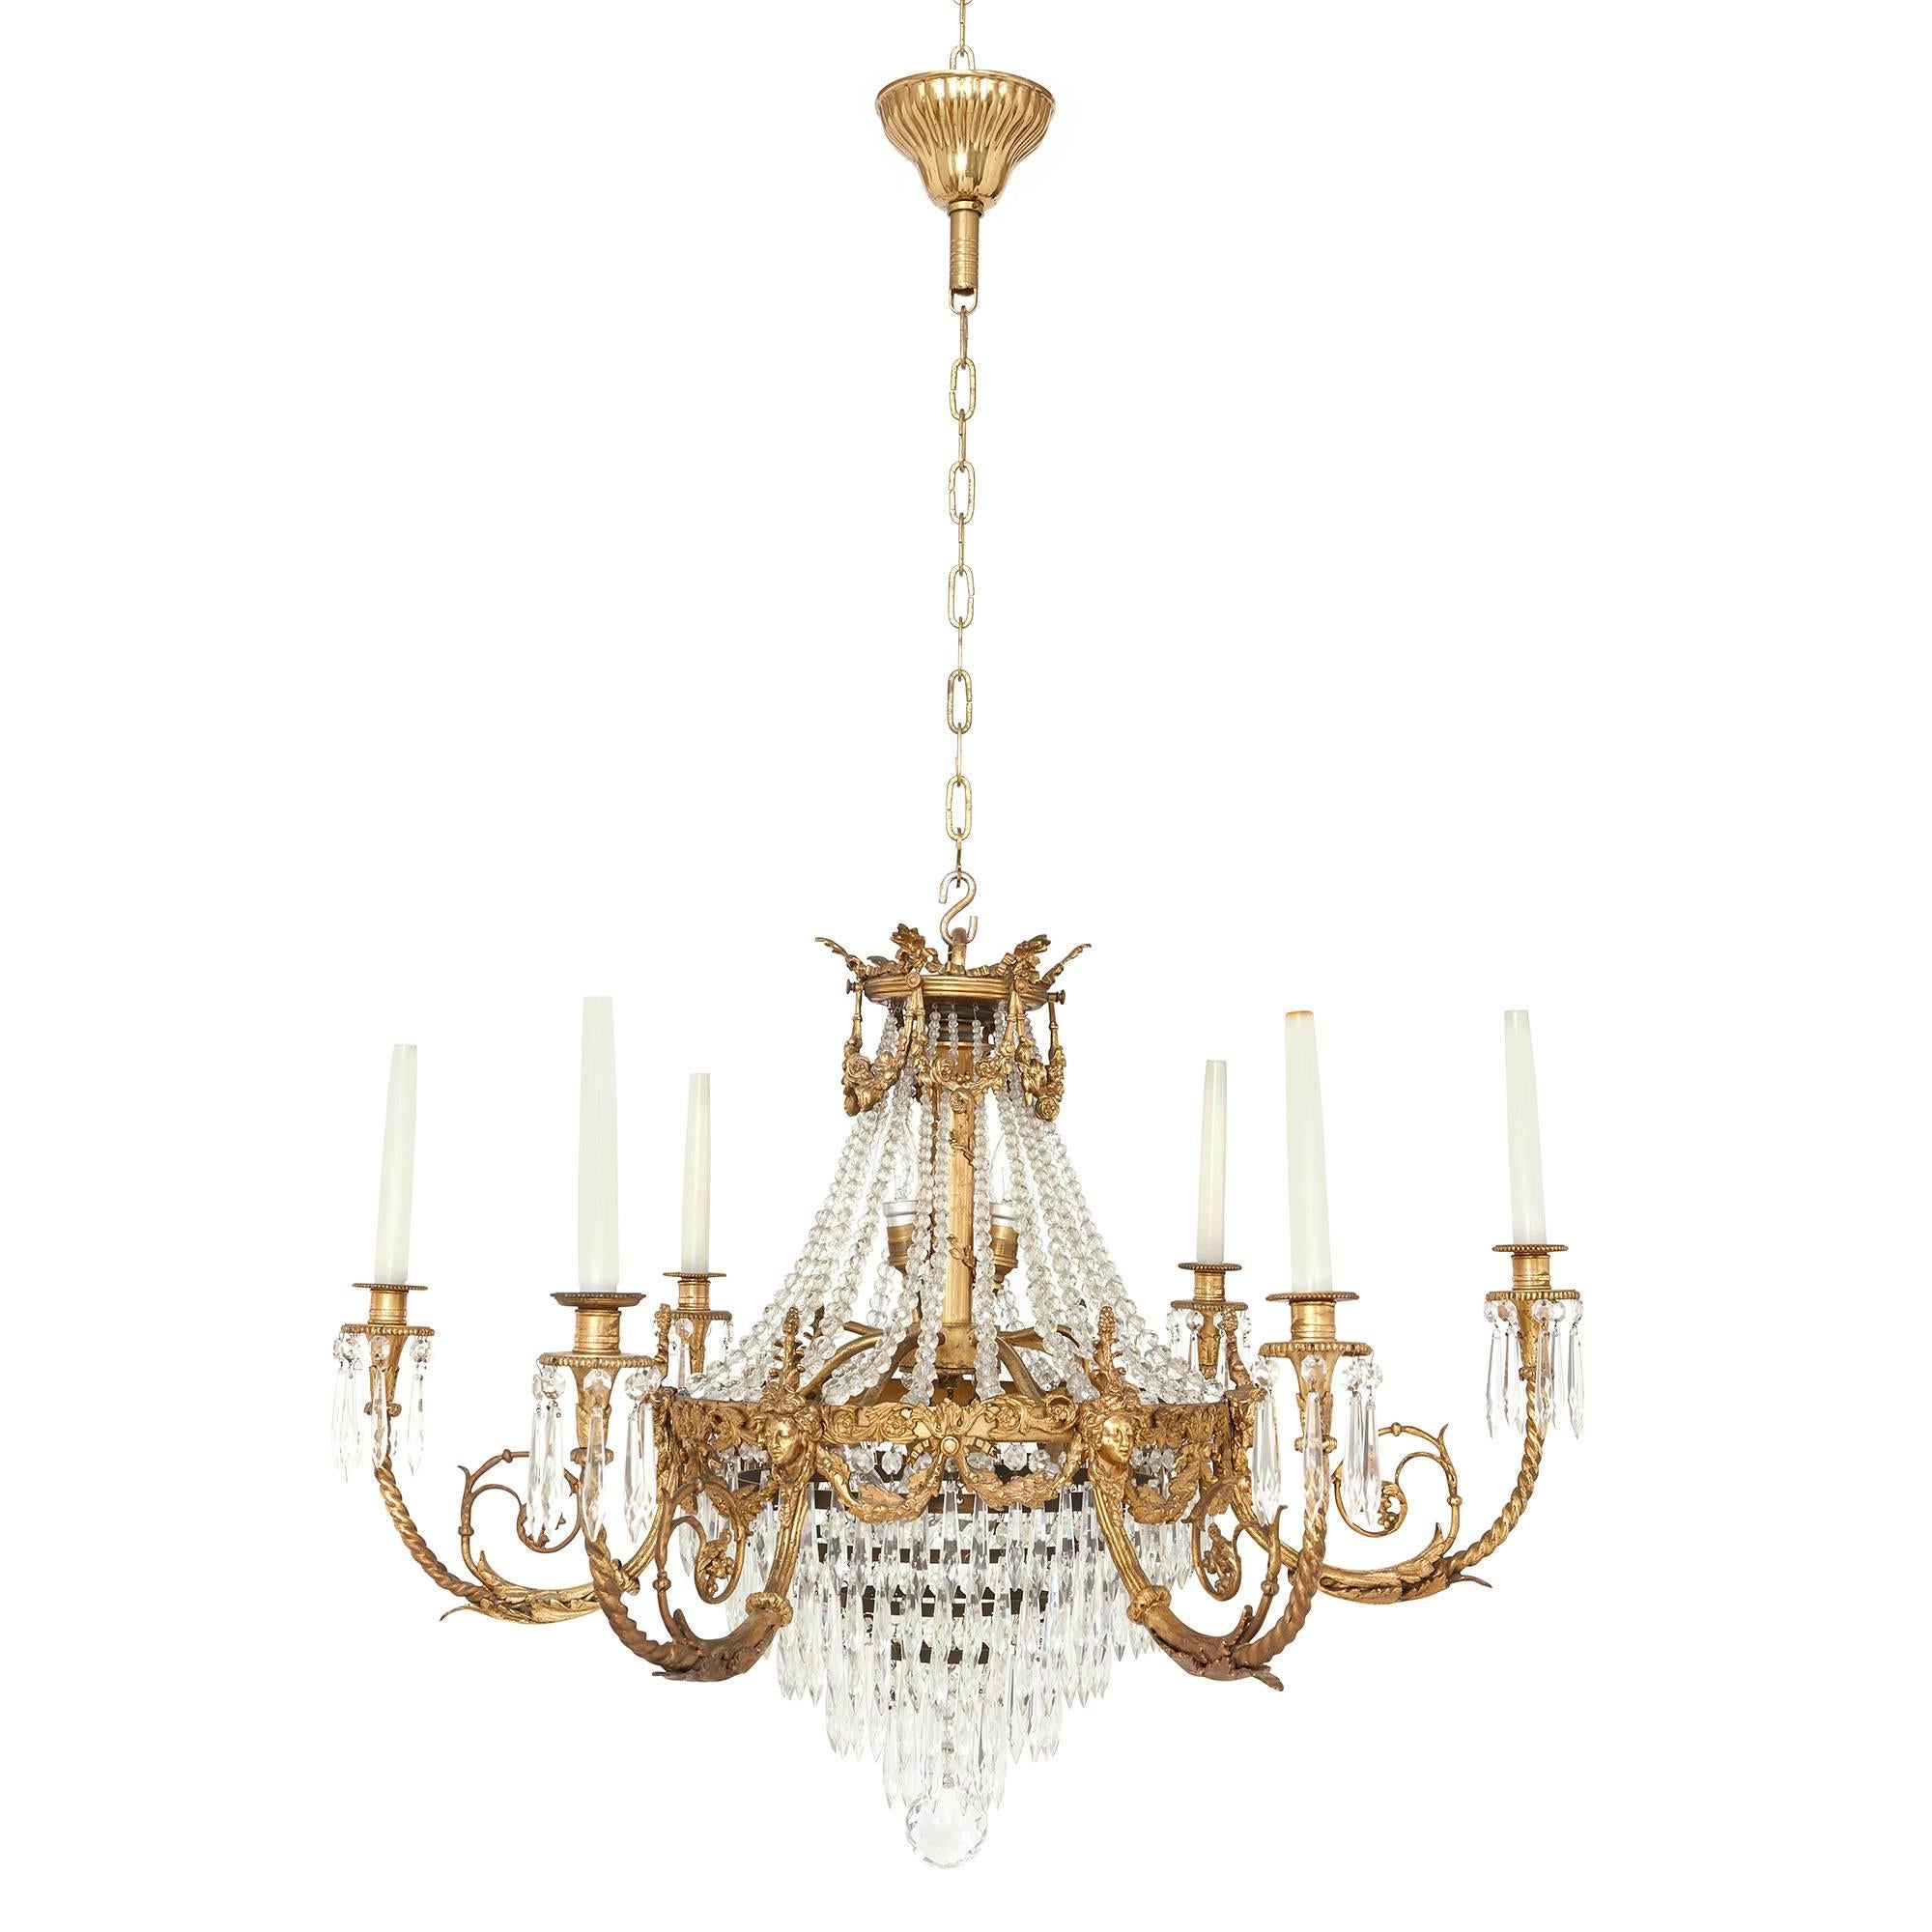 Antique French Gilt Bronze and Cut Glass Chandelier in the Empire Style